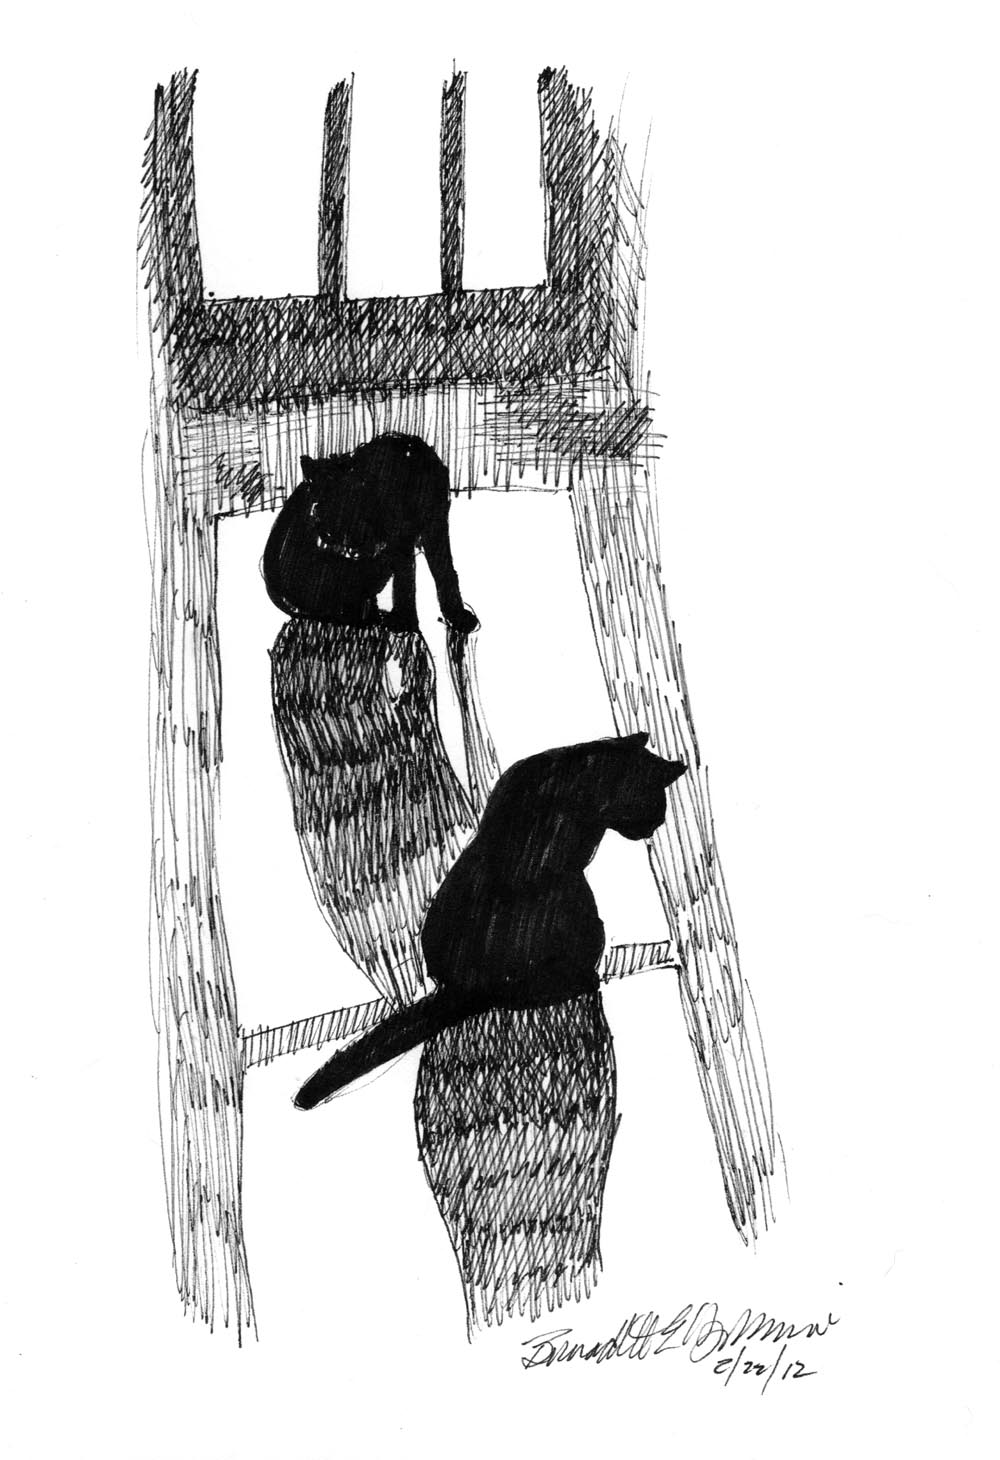 ink sketch of two cat silhouettes